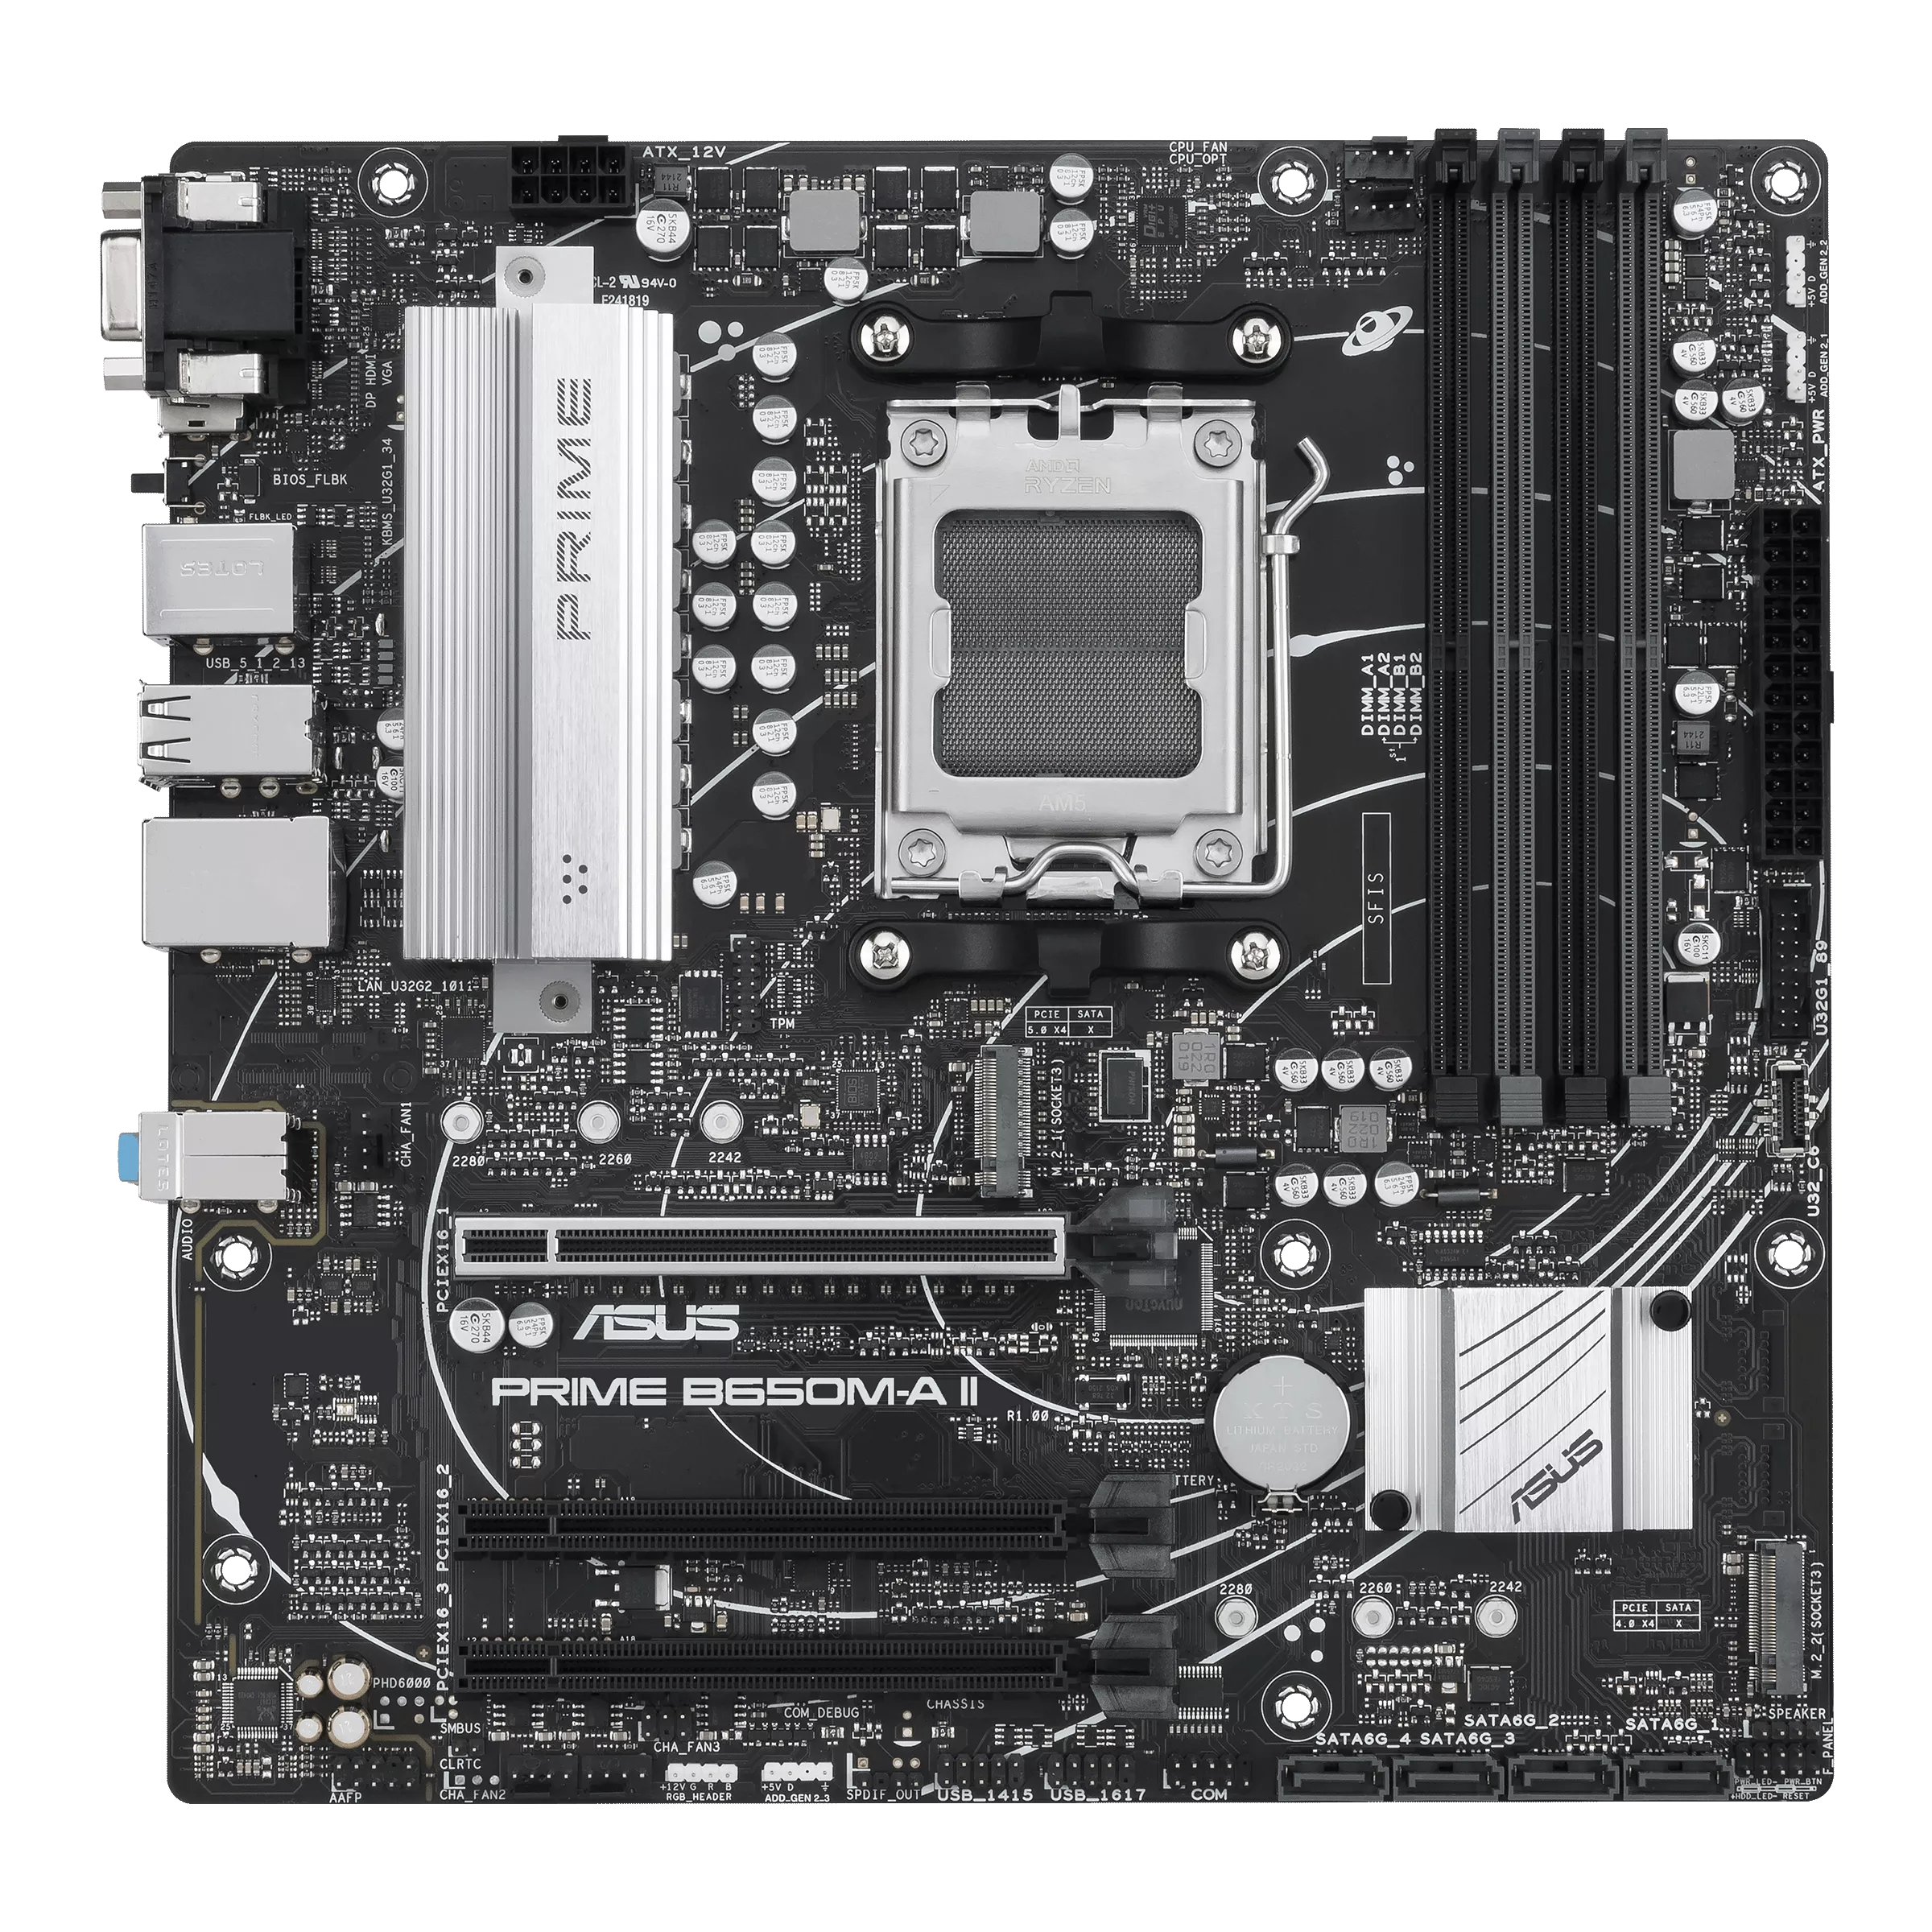 MOTHER ASUS PRIME B650M-A II